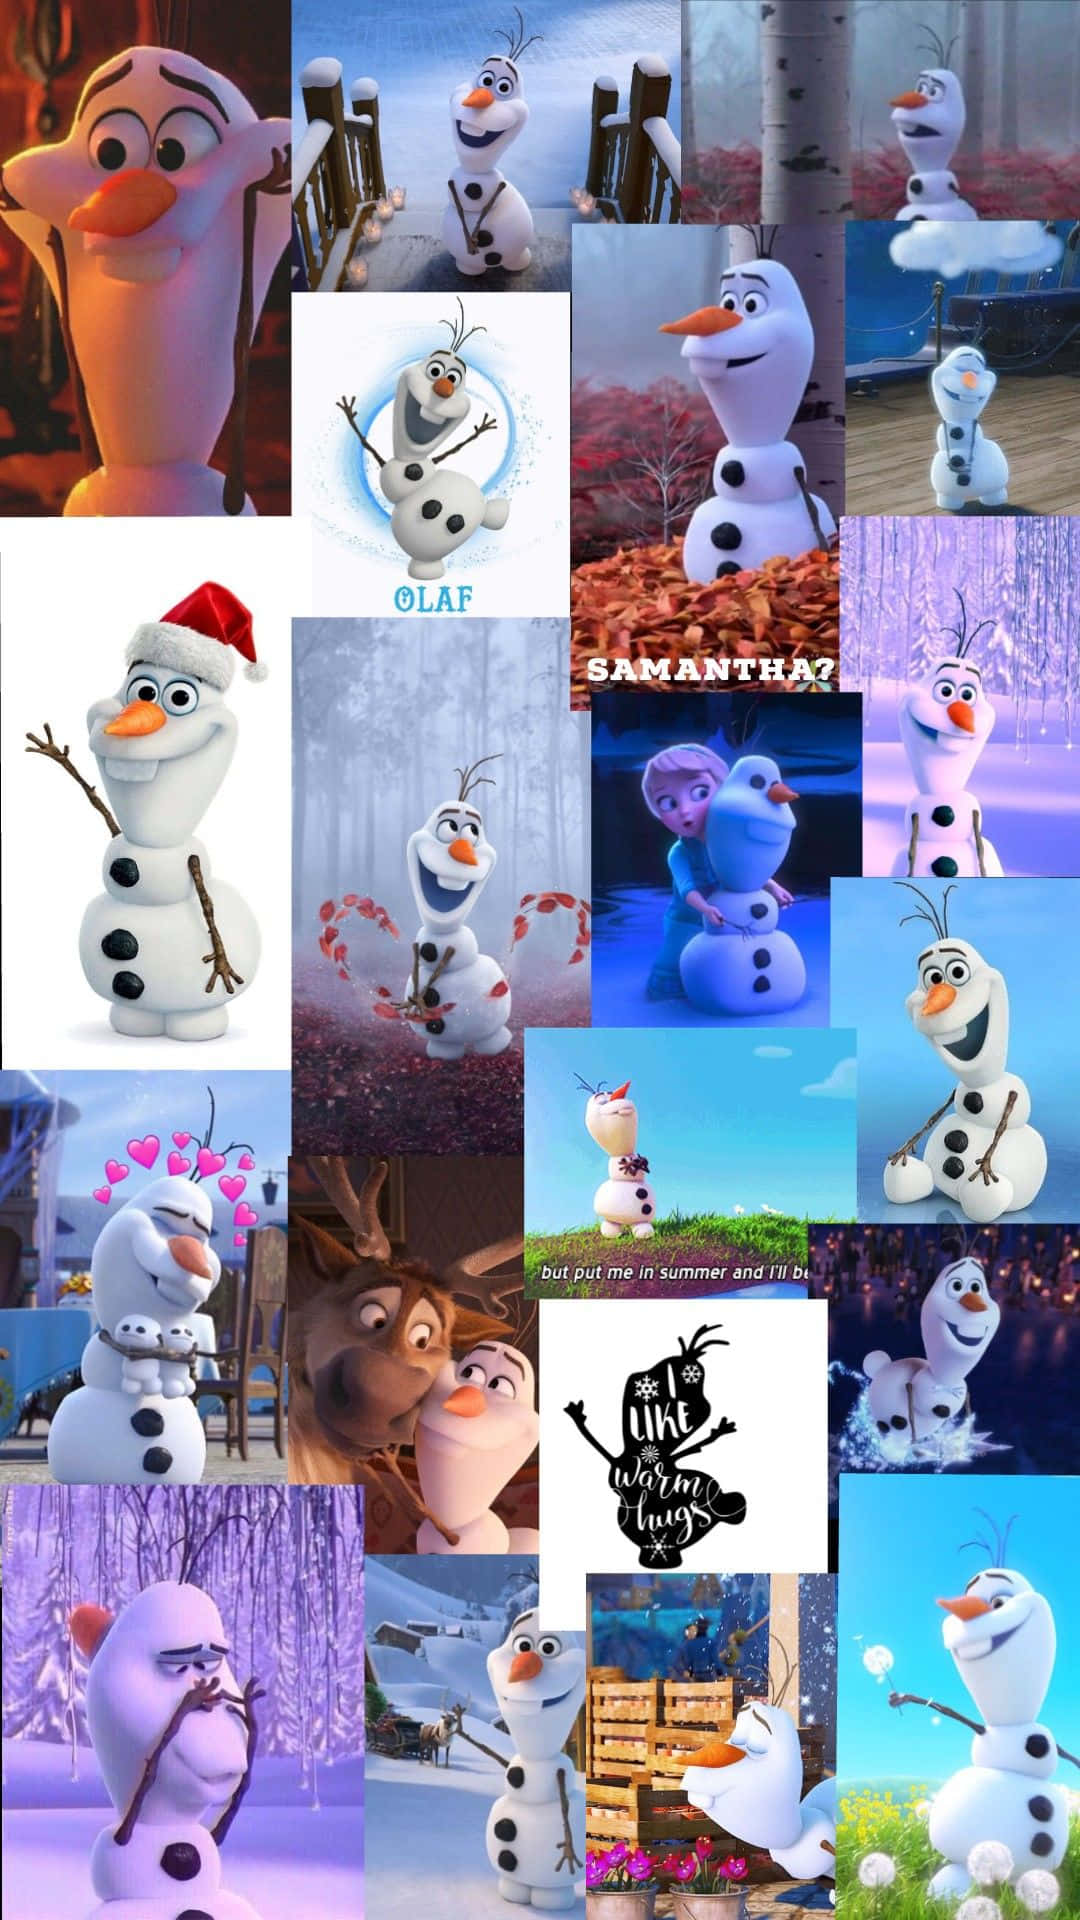 The Most Adorable Olaf Wallpaper